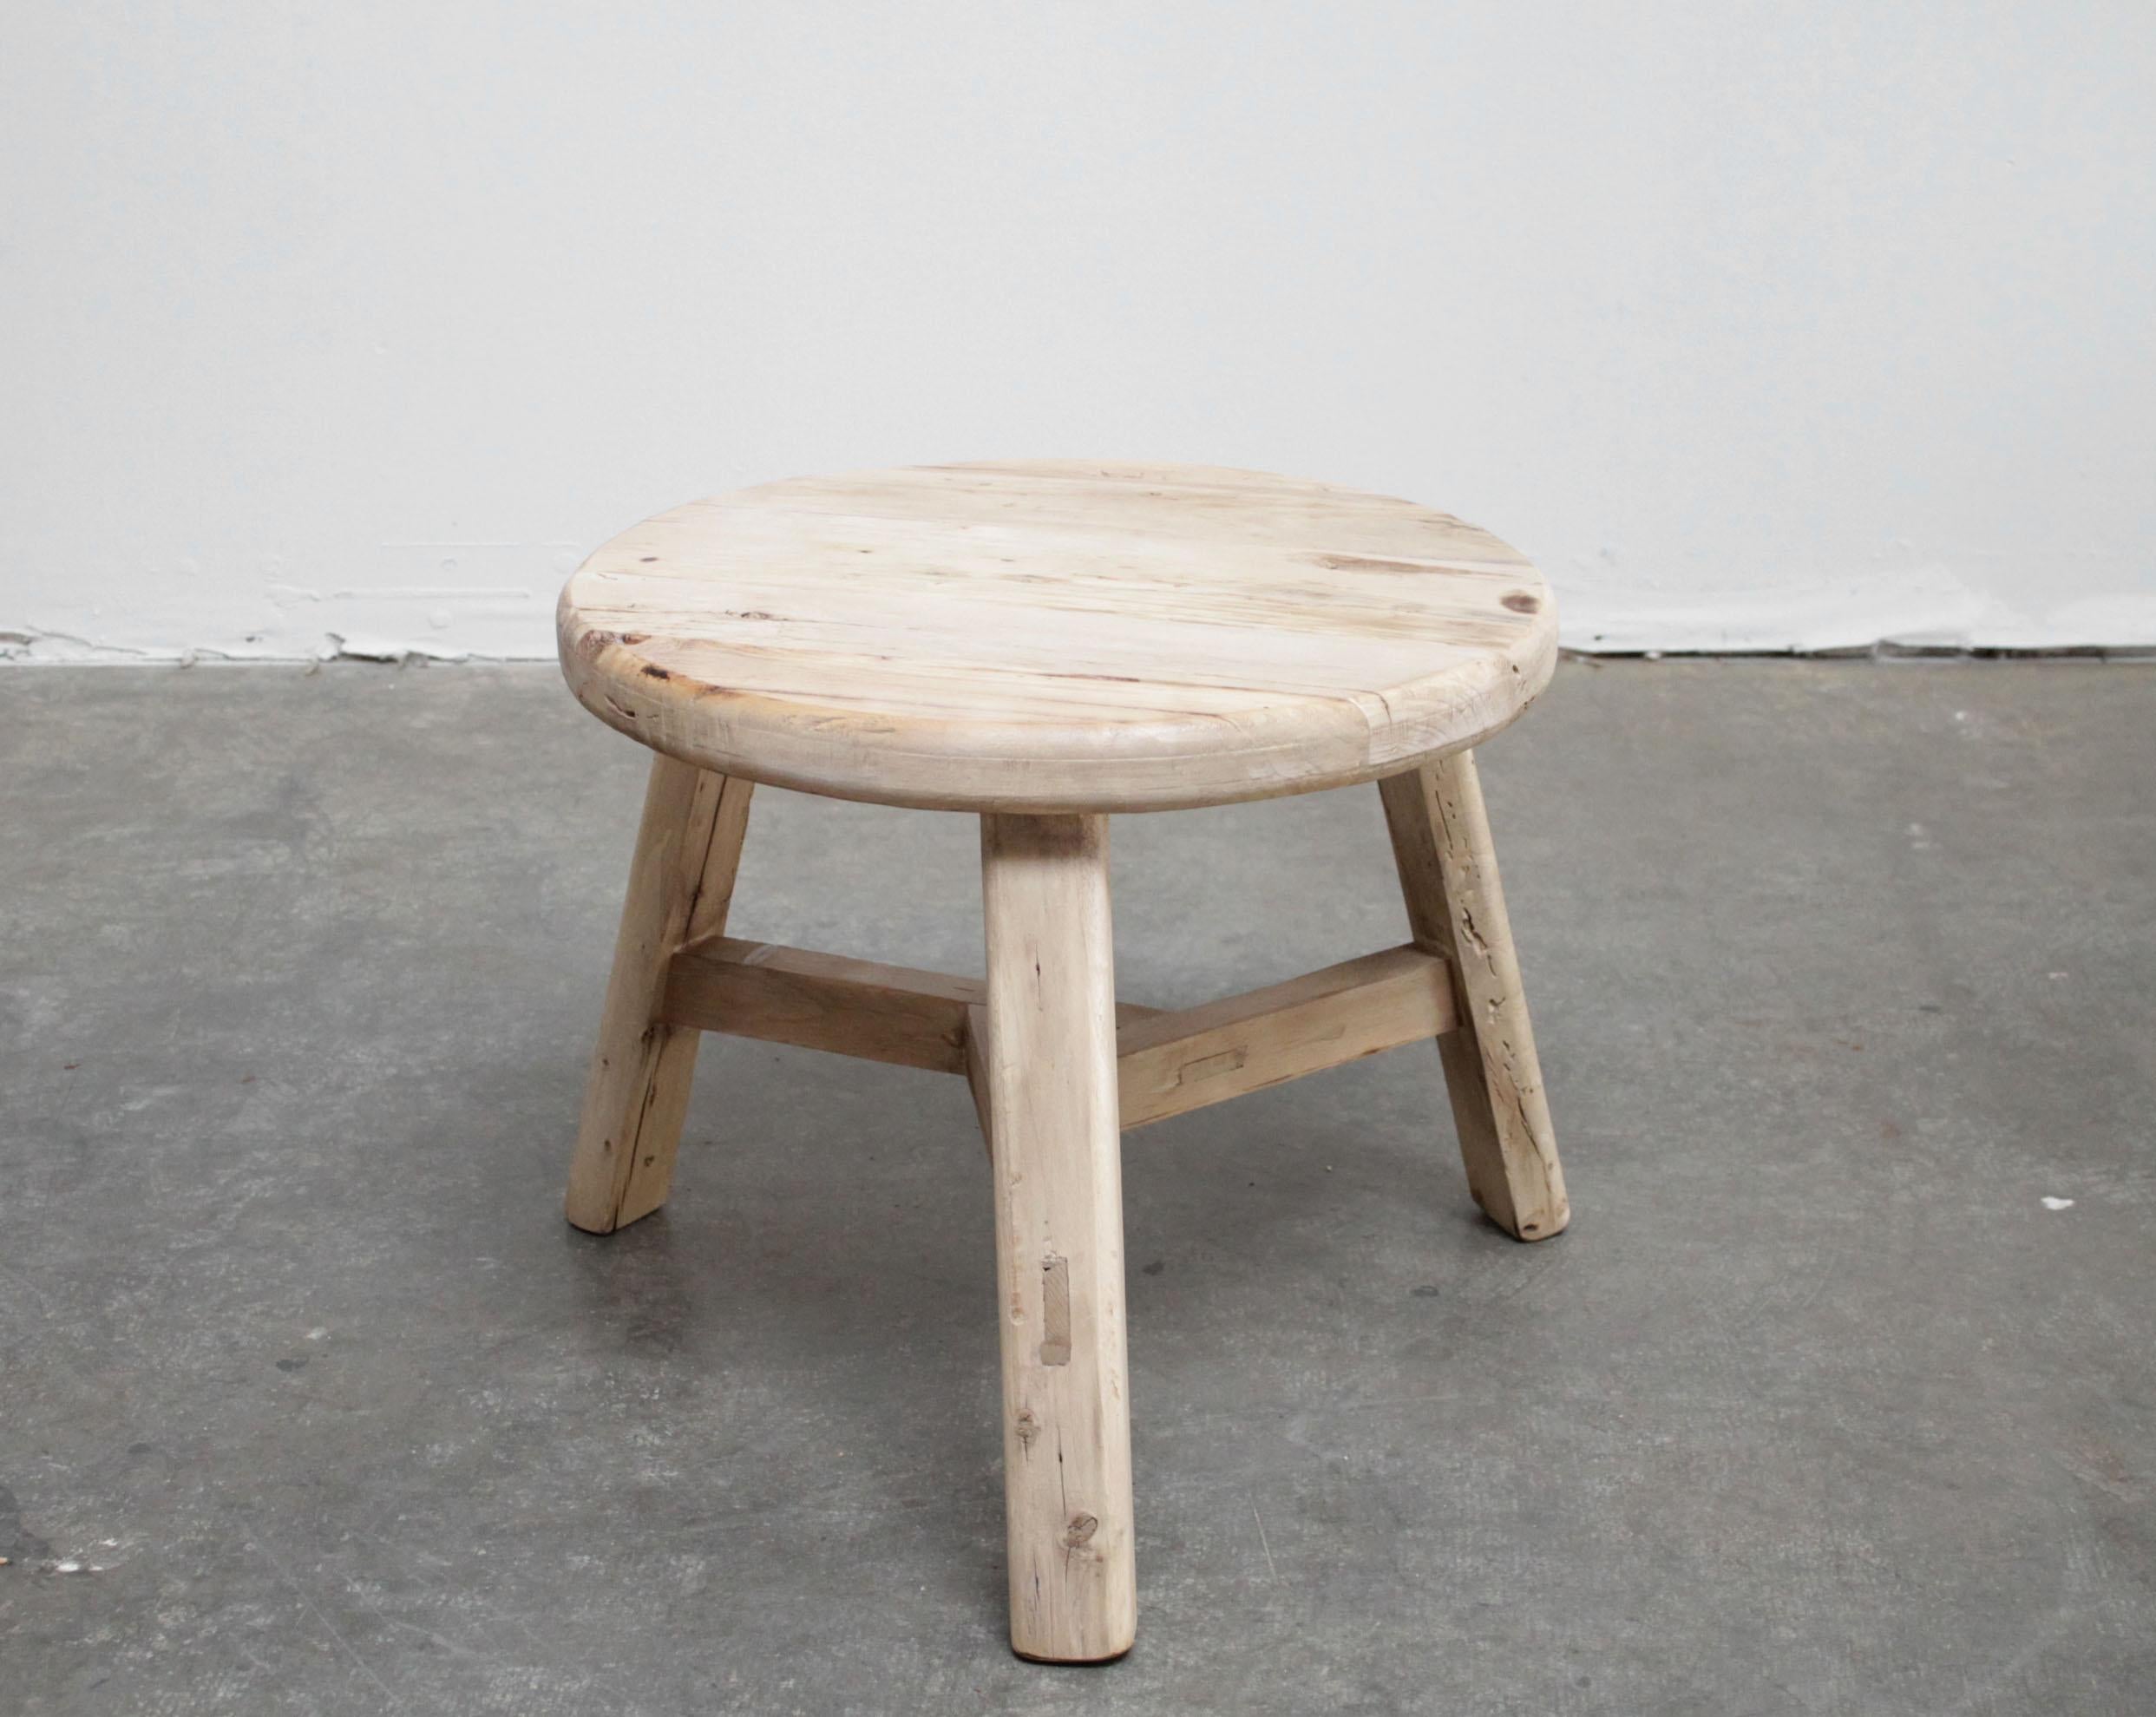 Round natural side table made from reclaimed elmwood.
Raw natural finish, a warm honey with gray tones in the wood. Solid and sturdy, a great side table for next to a bed, sofa, chairs.
Size: 21